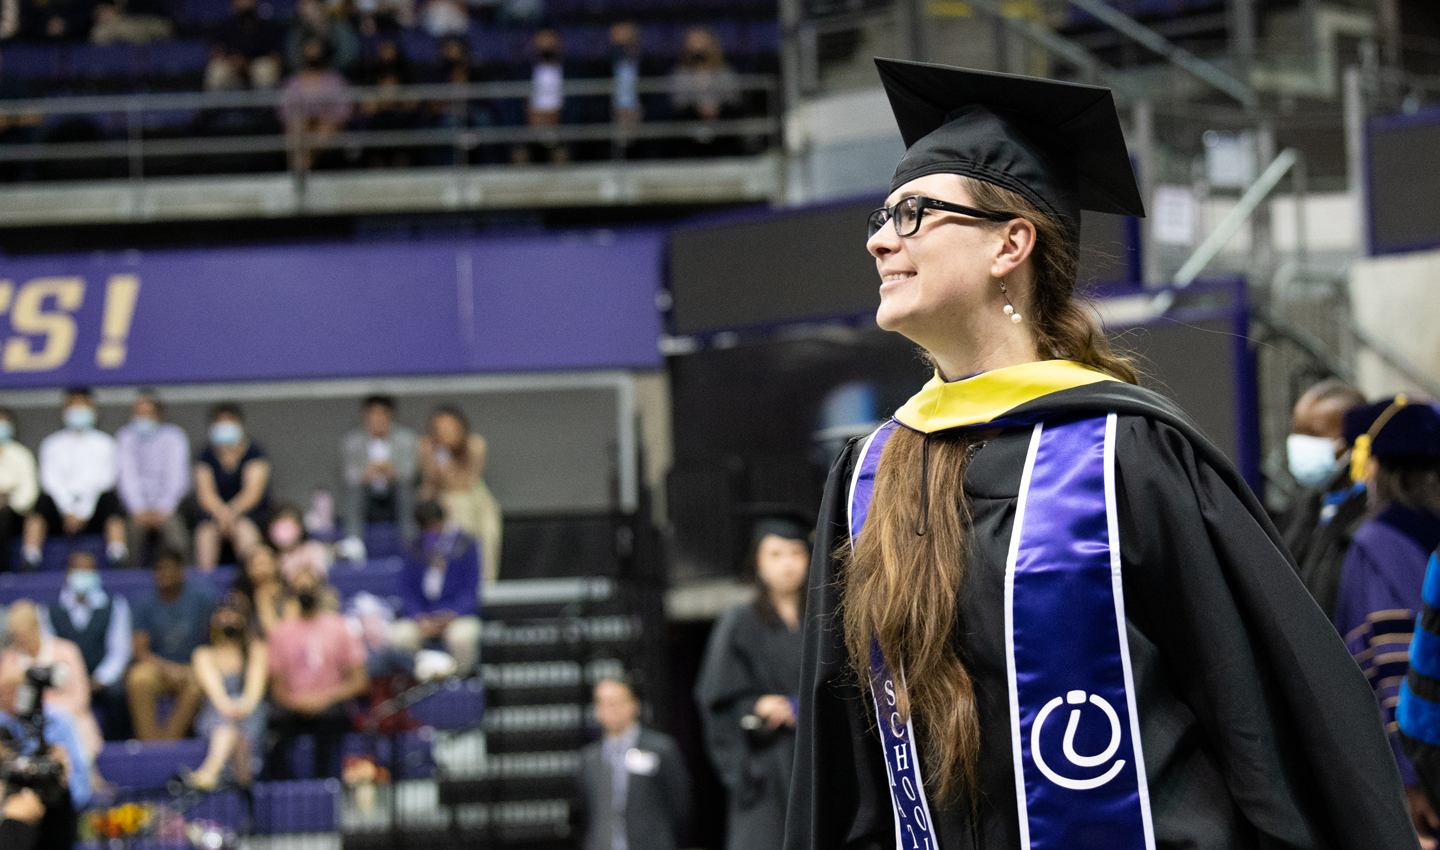 A student walks at Convocation.